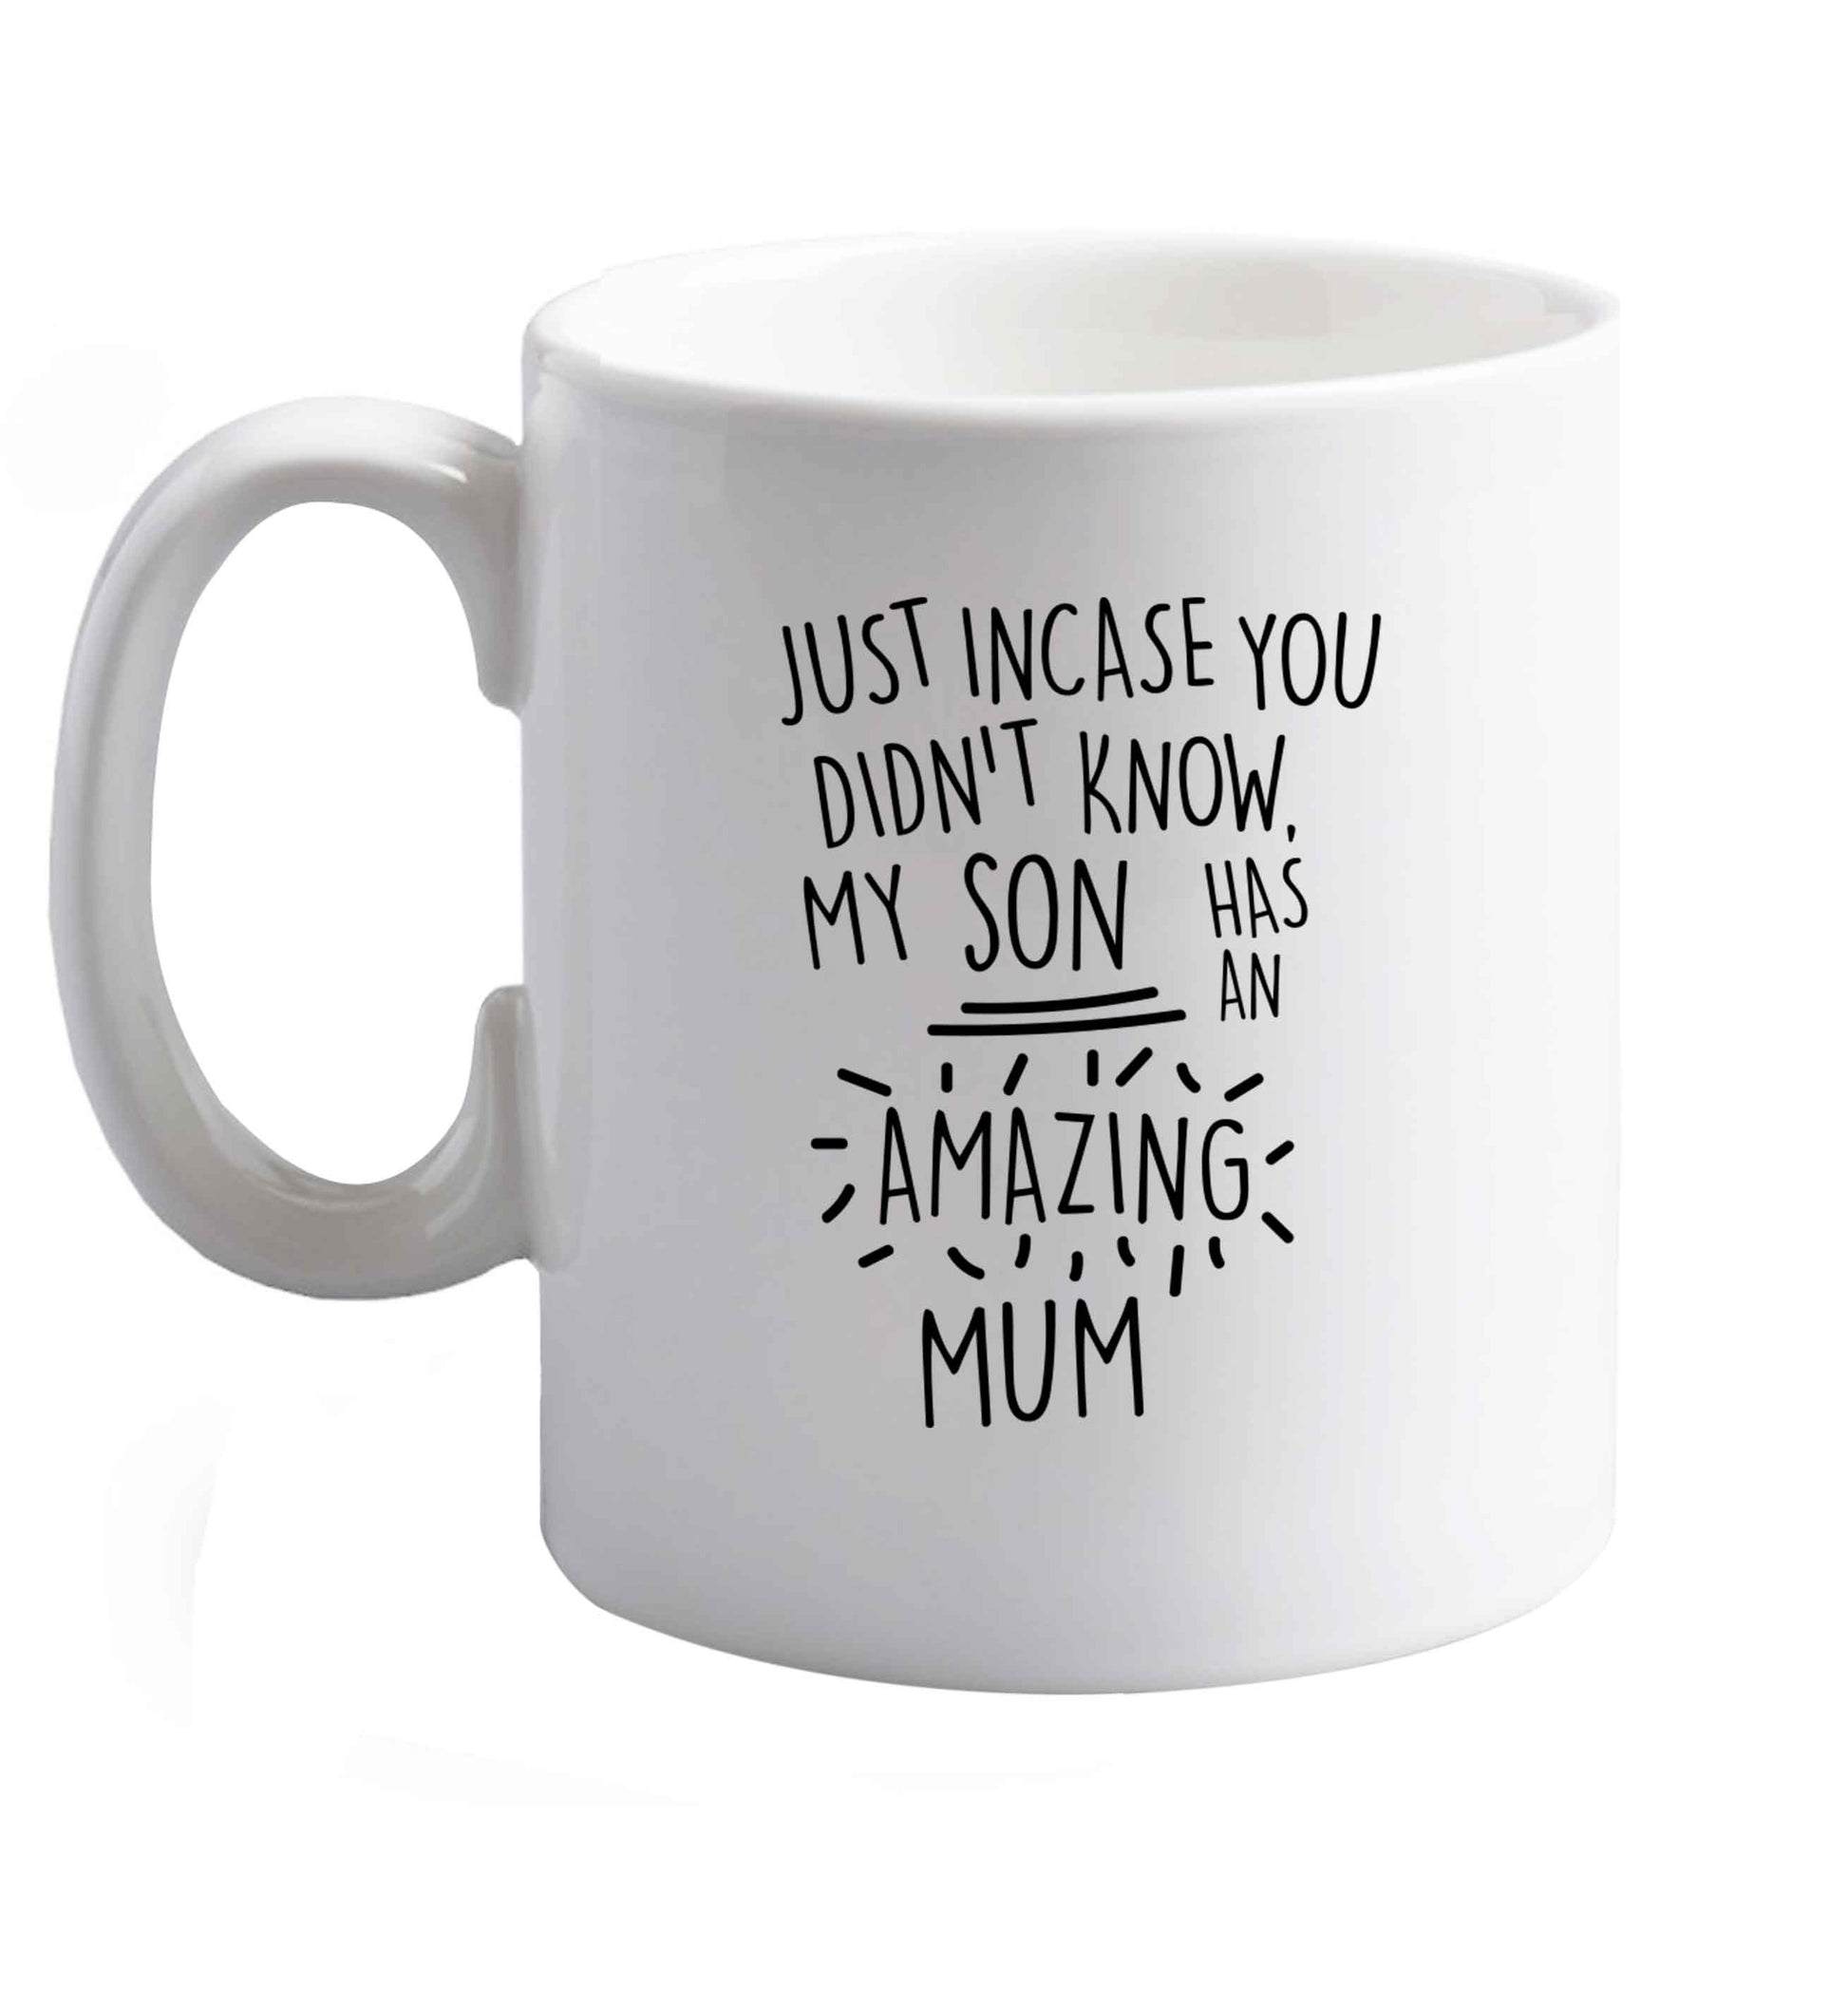 10 oz Just incase you didn't know my son has an amazing mum ceramic mug right handed